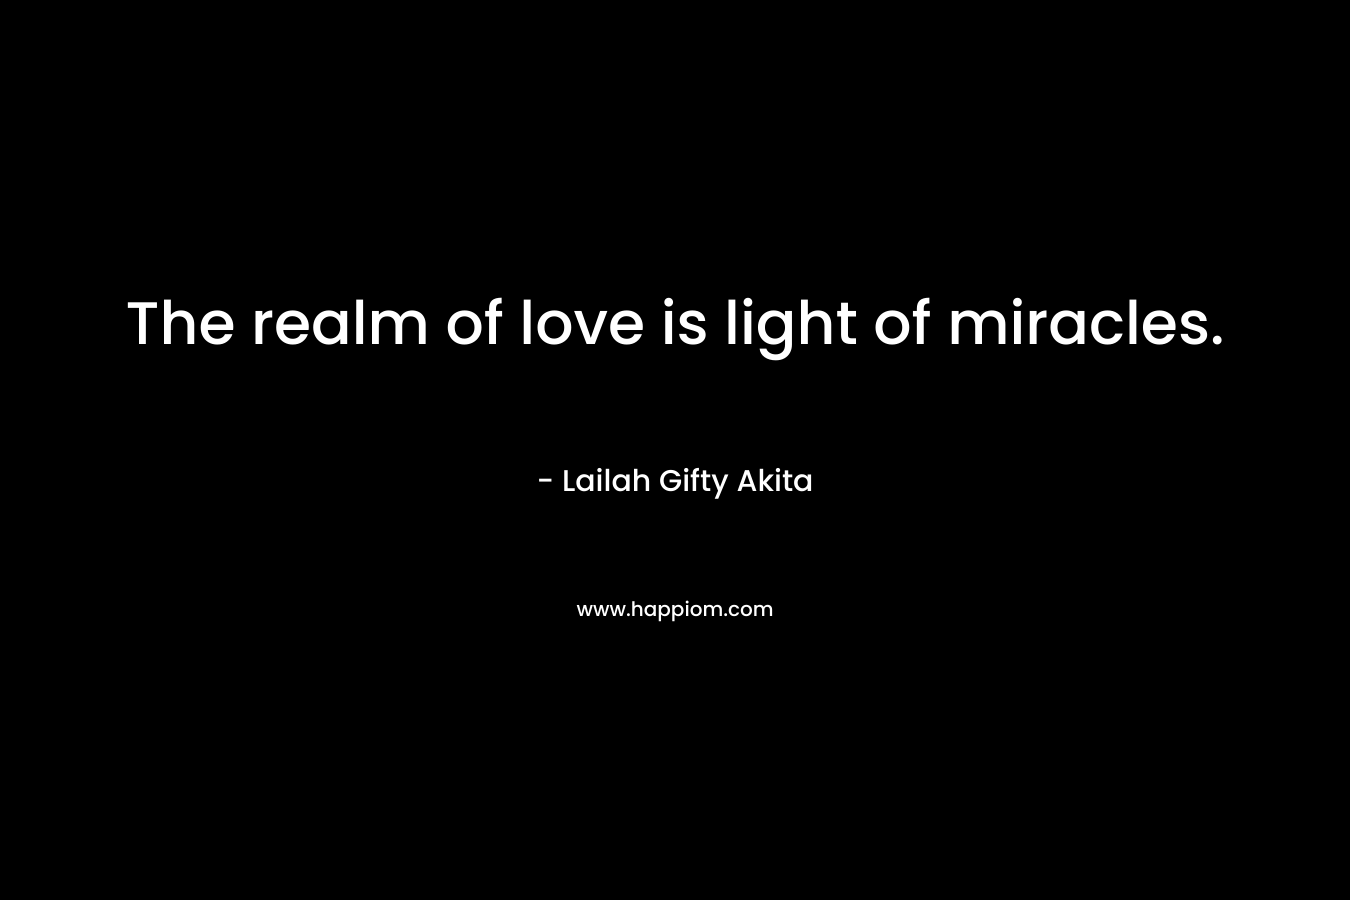 The realm of love is light of miracles.